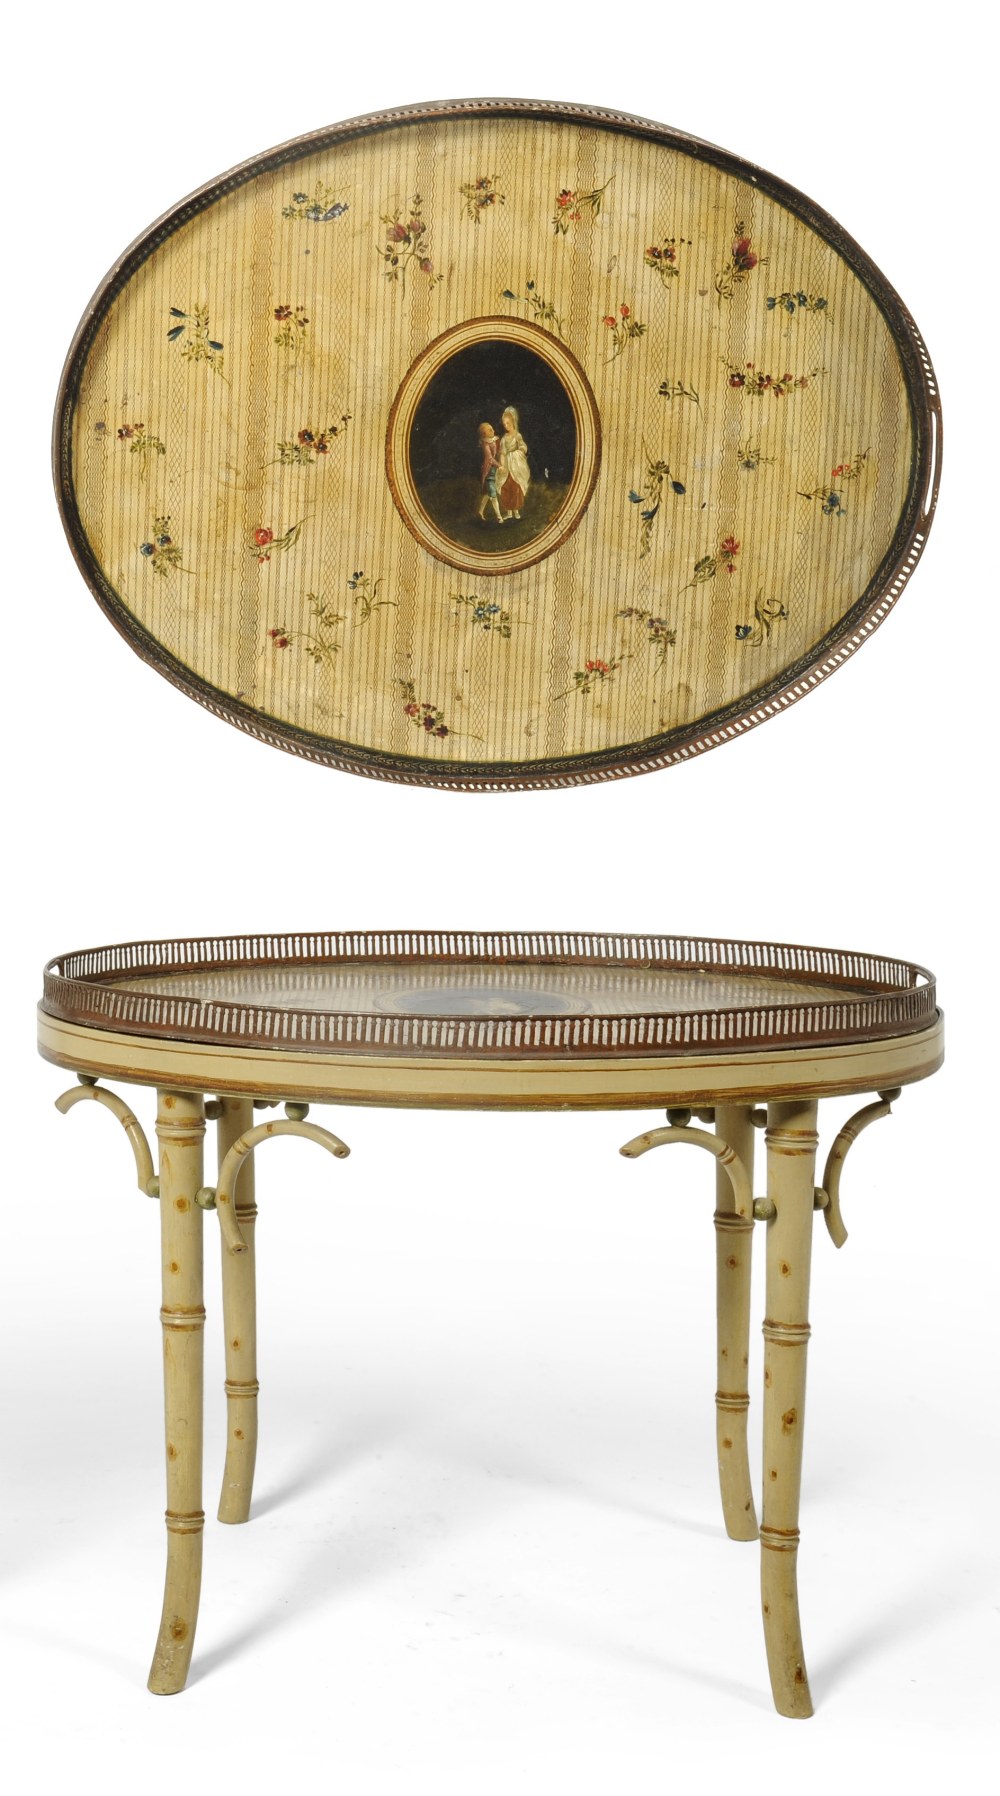 A Regency Toleware Tray, early 19th century, with gallery border, painted with an oval panel of a